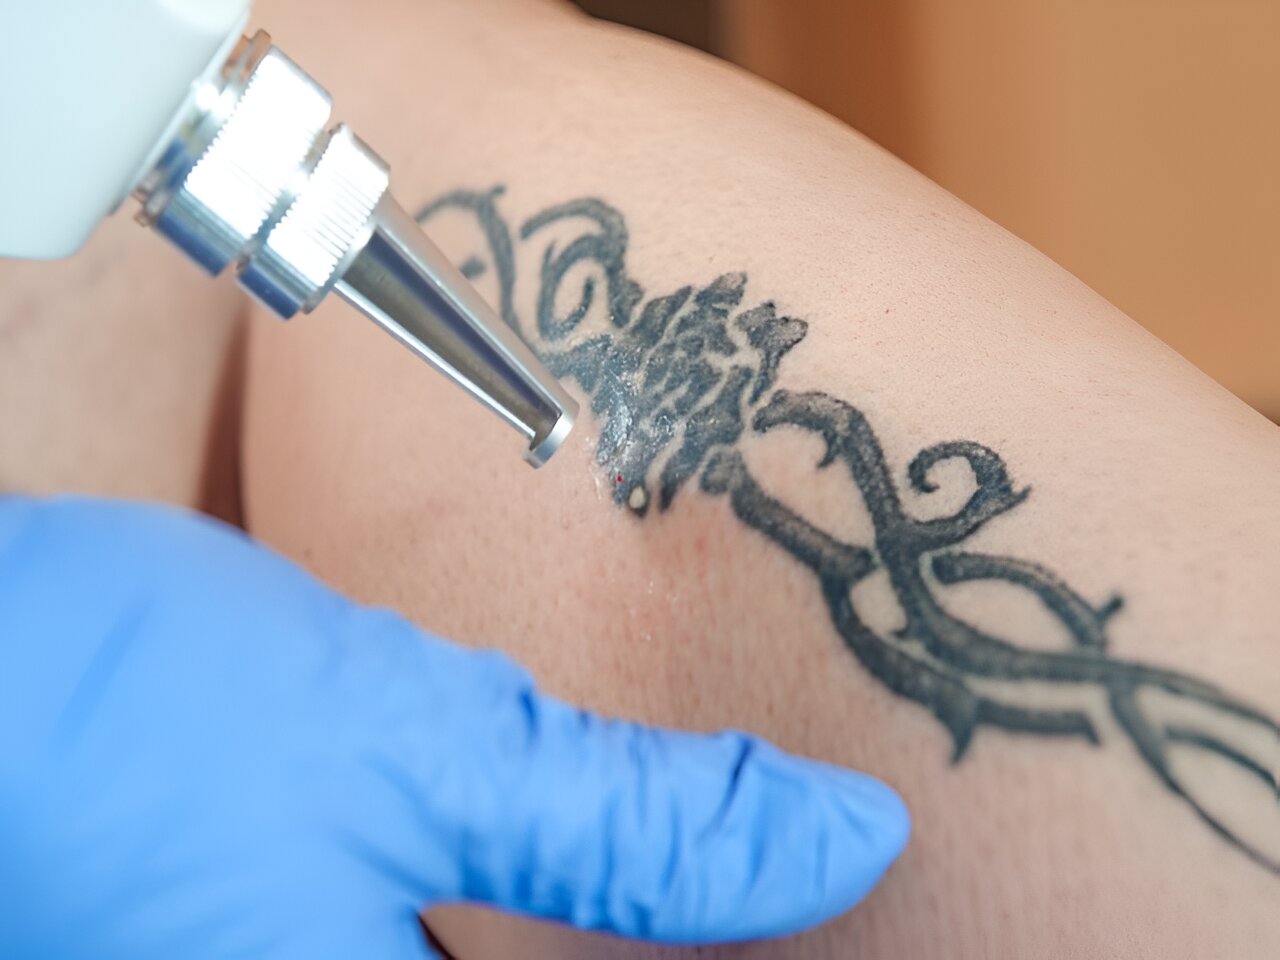 Know about the different methods of Tattoo Removal.